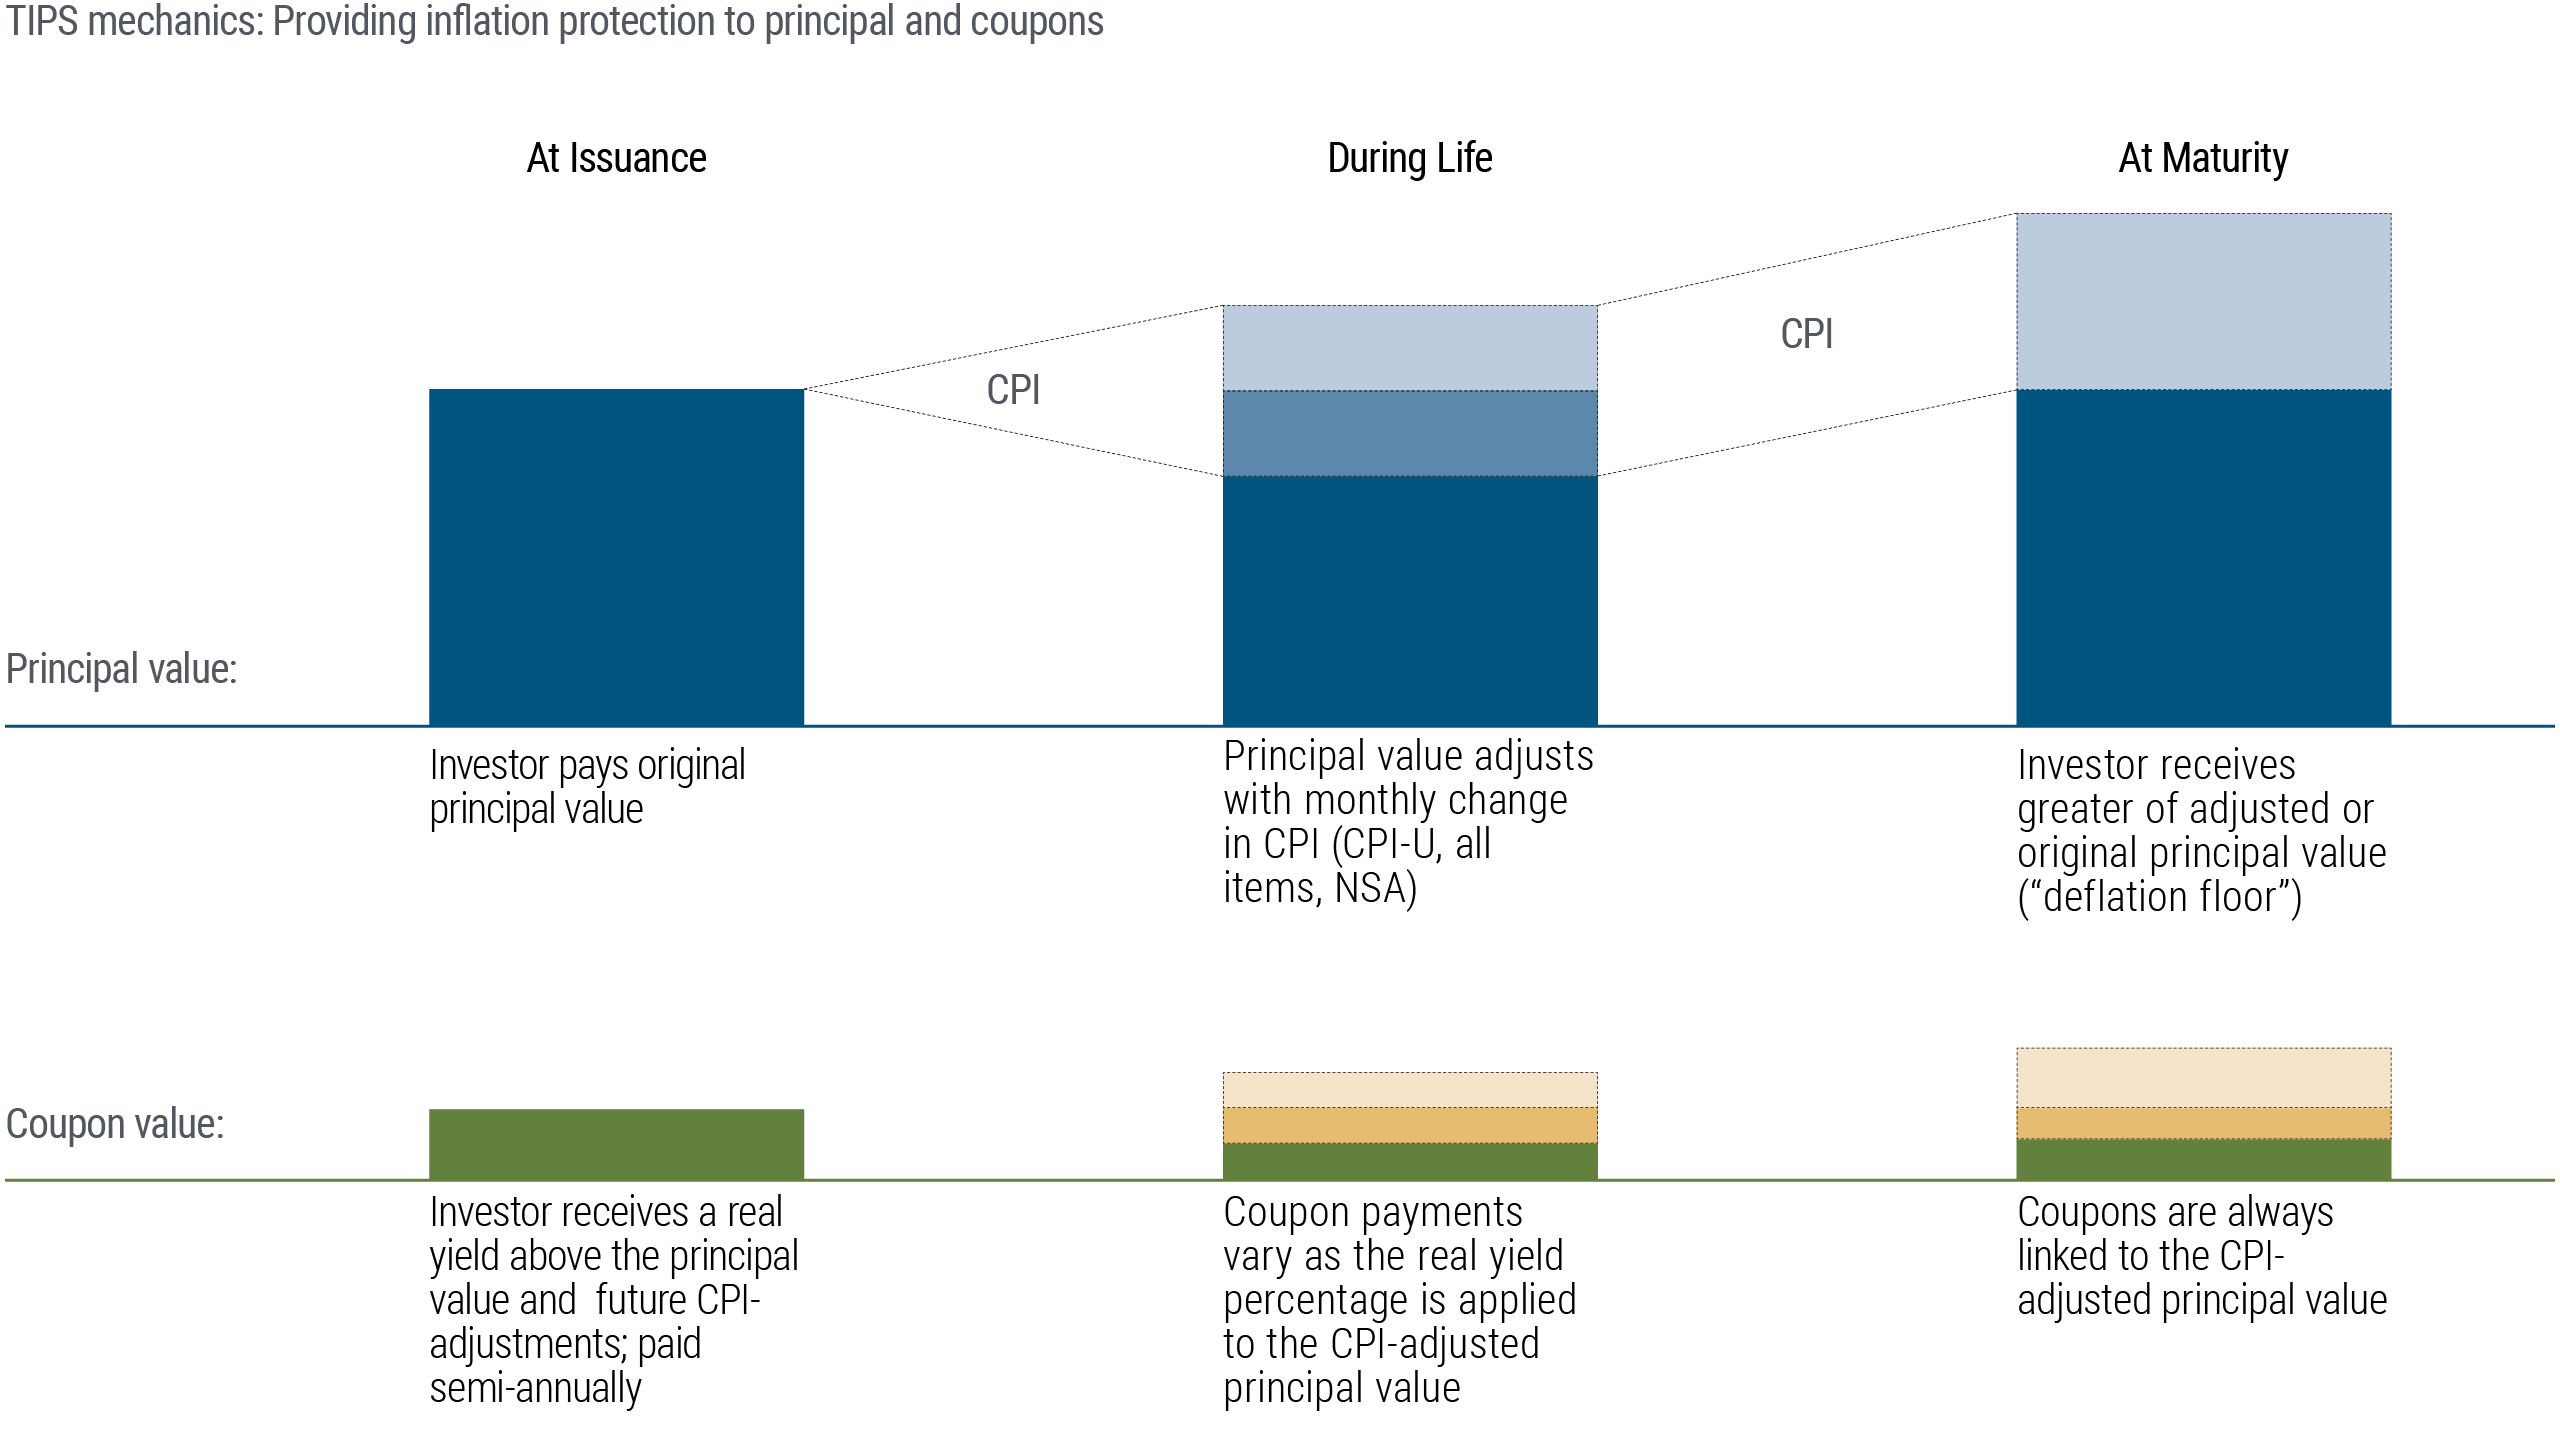 This graphic explains how Treasury Inflation-Protected Securities (TIPS) can grow in value over time, focusing on the principal value and coupon value at different stages: at issuance, during life, and at maturity.   The graphic uses a combination of colored bars and gray lines to represent changes in principal and coupon values across the lifetime of the securities, with CPI adjustments illustrated as shaded areas above the initial principal.   The upper part of the graphic depicts lifetime changes in principal value, while the lower part of the graphic depicts lifetime changes in coupon value.   1. Lifetime of principal value:  - At Issuance: Investor pays original principal value.  - During Life: Principal value adjusts with monthly change in CPI (CPI-U, all items, NSA).  - At Maturity: Investor receives the greater of the adjusted or original principal value (referred to as the "deflation floor").  2. Lifetime of coupon value:  - At Issuance: Investor receives a real yield above the principal value and future CPI adjustments; paid semi-annually.  - During Life: Coupon payments vary as the real yield percentage is applied to the CPI-adjusted principal value.  - At Maturity: Coupons are always linked to the CPI-adjusted principal value.  The source of the data is PIMCO, and the graphic is labeled for illustrative purposes only.   Regarding acronyms:   NSA stands for non-seasonally adjusted.   CPI is an abbreviation for Consumer Price Index, a common and universally-respected inflation measure.